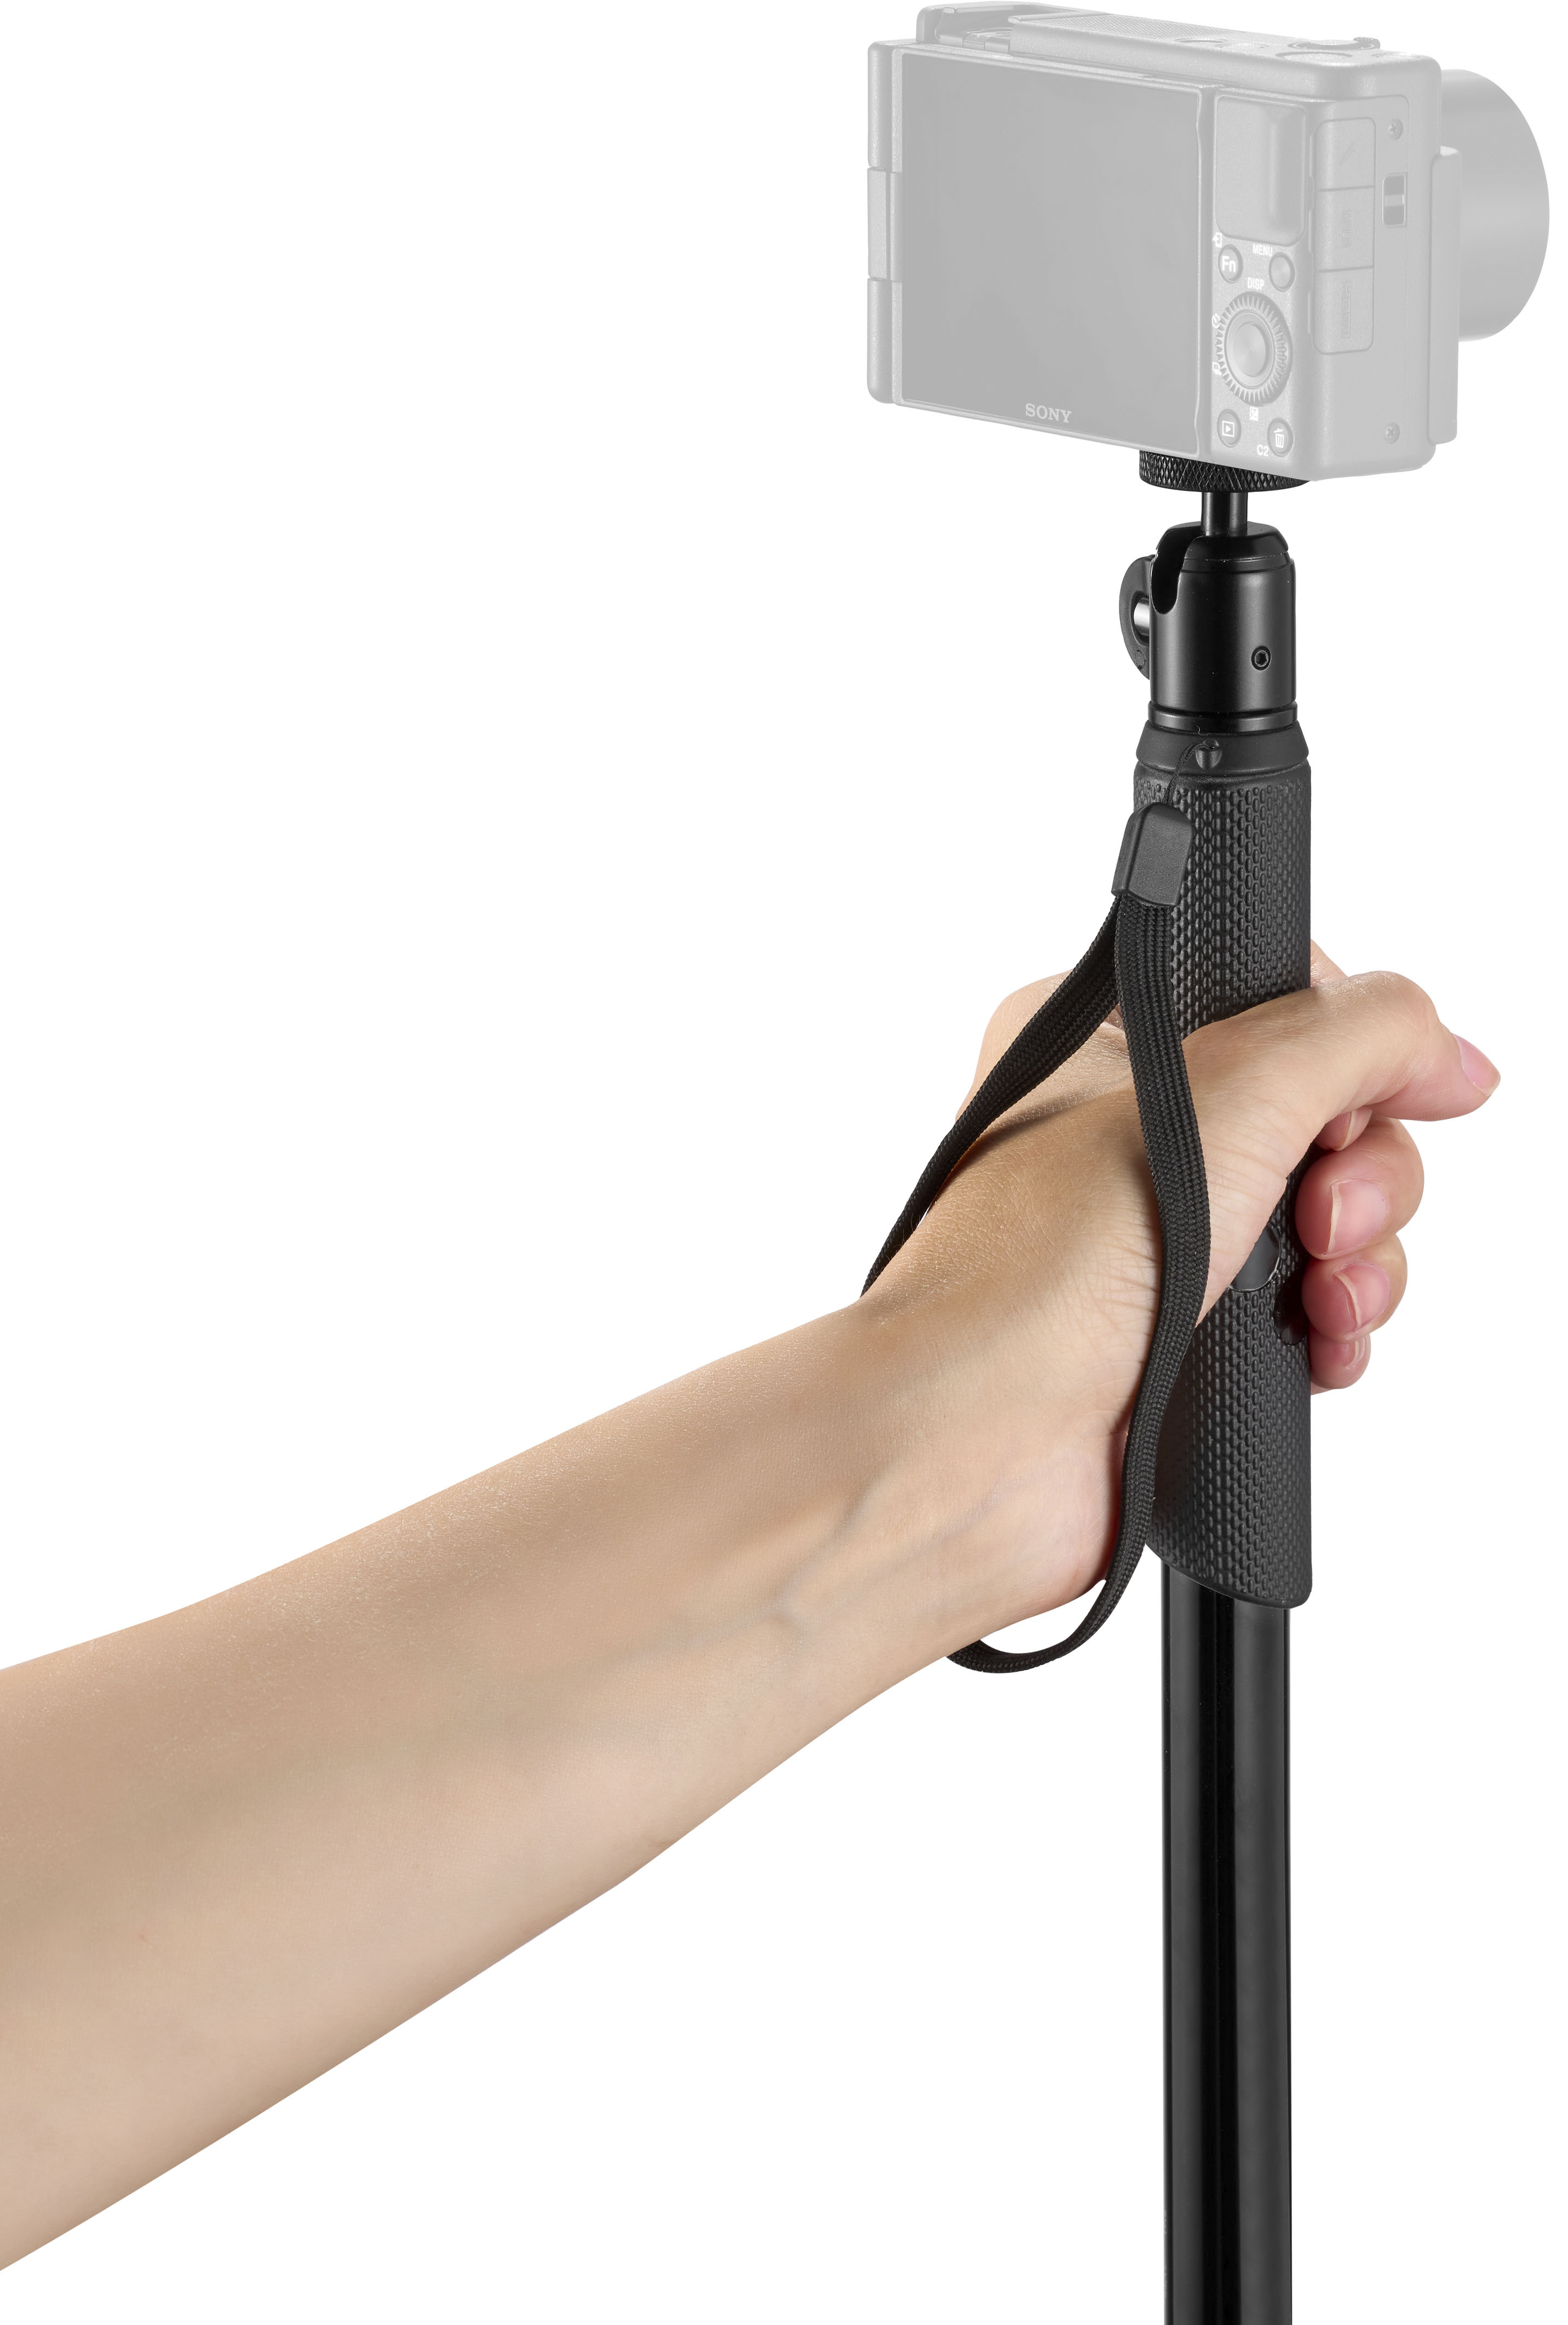 Angle View: JOBY - Compact 2-in-1 53" Monopod